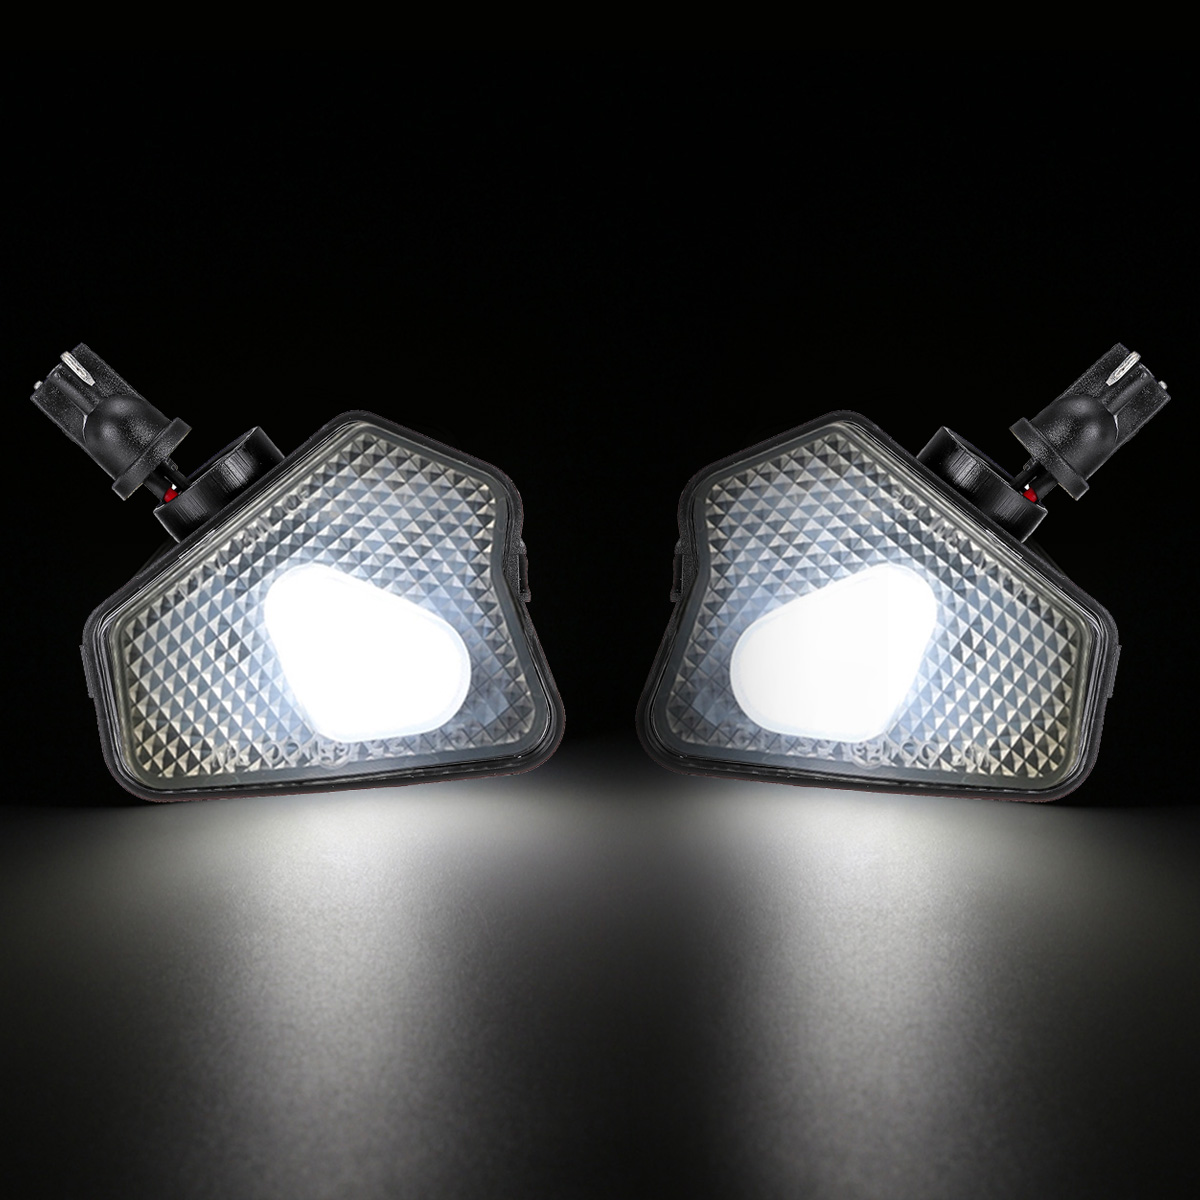 2Pcs LED Car Rearview Mirror Lights under Mirror Puddle Lights for Mercedes Benz W117 W204 W212 W221 W218